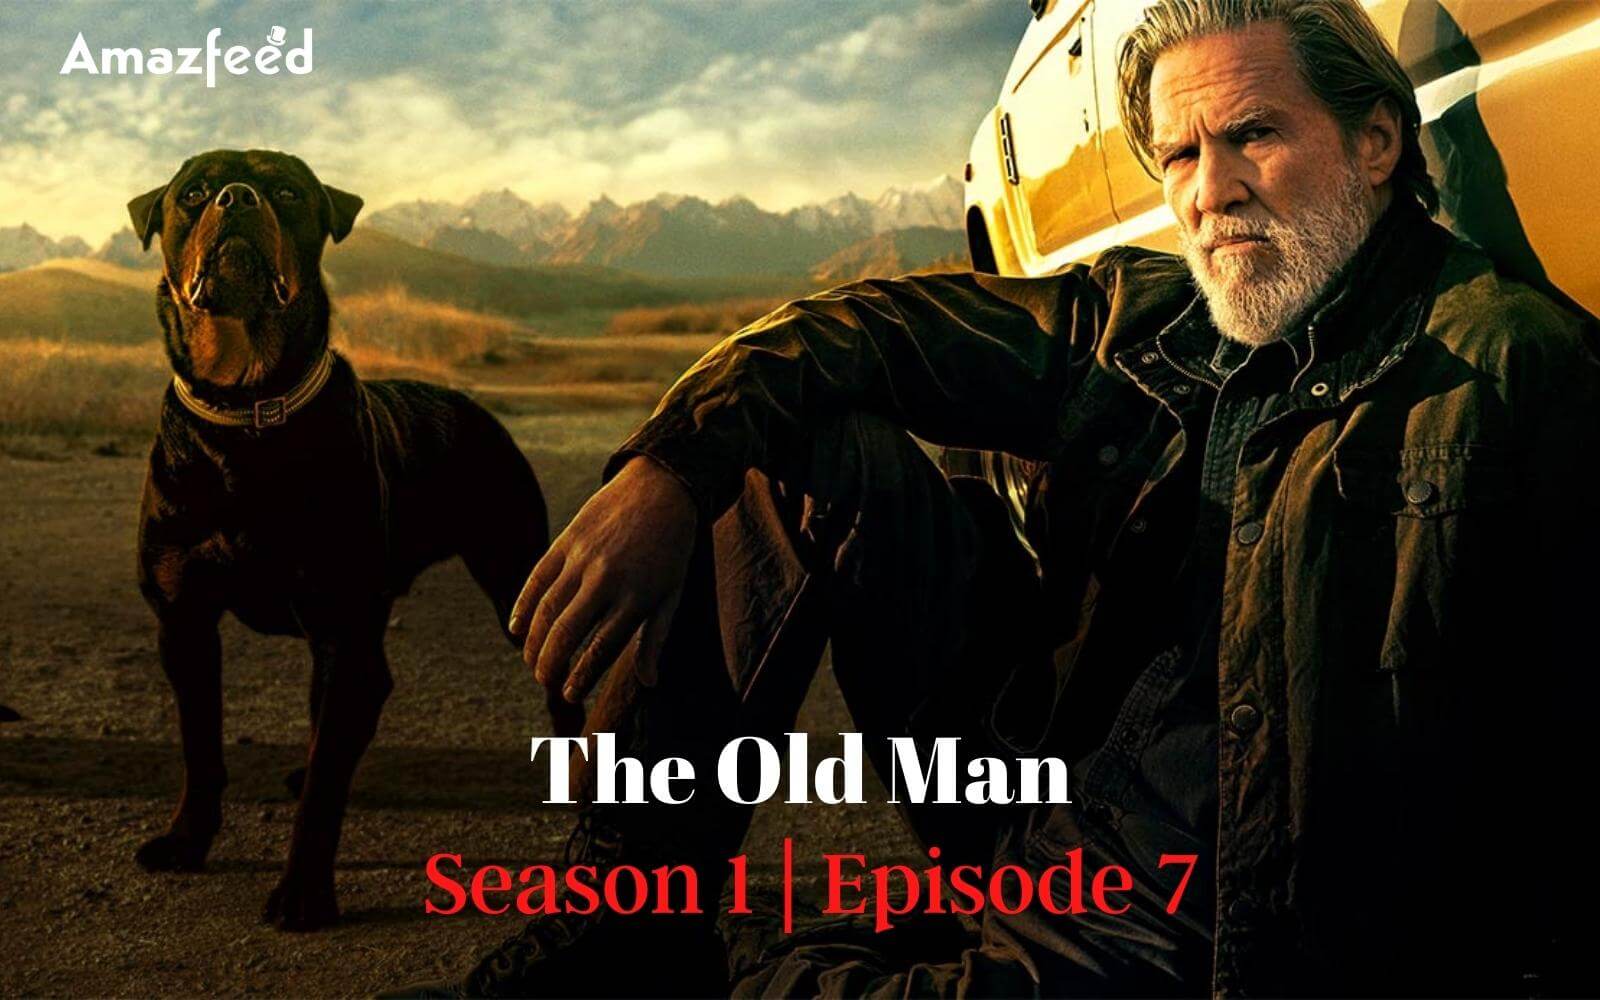 The Old Man Season 1 Episode 7: Countdown, Release Date, Spoiler, and Cast Everything You Need To Know